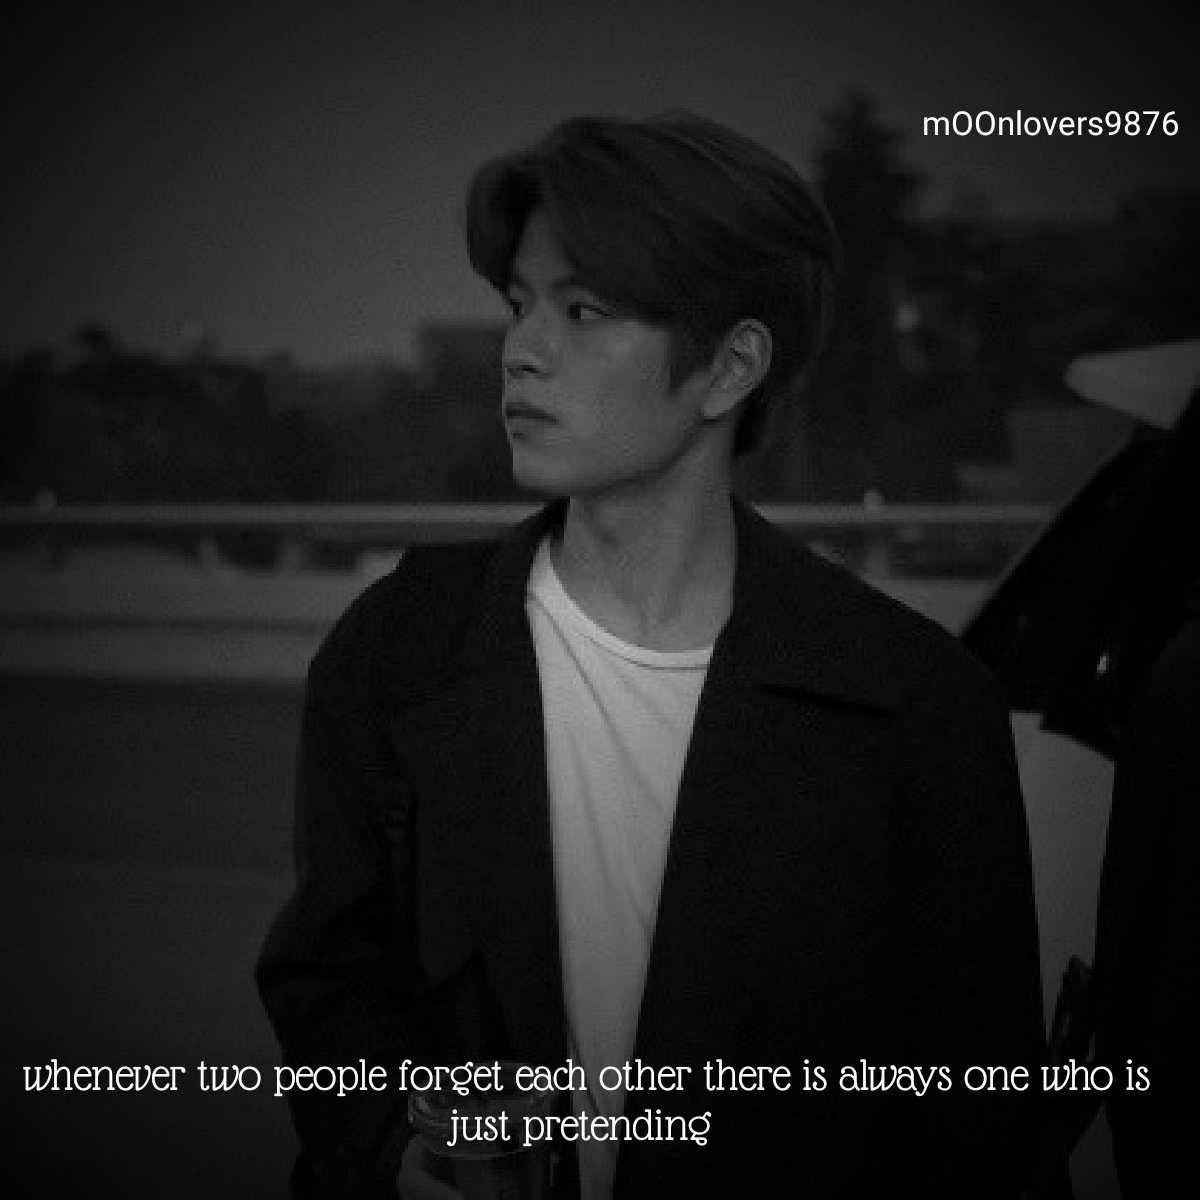 Whenever two people forget each other there is always one whois just pretending.
.
.
.
Follow @mOOnlovers9876 
.
.
.
#kpop #kdrama #straykids #jisoo #blink #txt #kpopl4l #kpoprp #kpopf4f #jyp #kpopmemes #once #ateez #kpopedit #kpopfff #girlgroup #kpopidol #kpoplfl #mamamoo